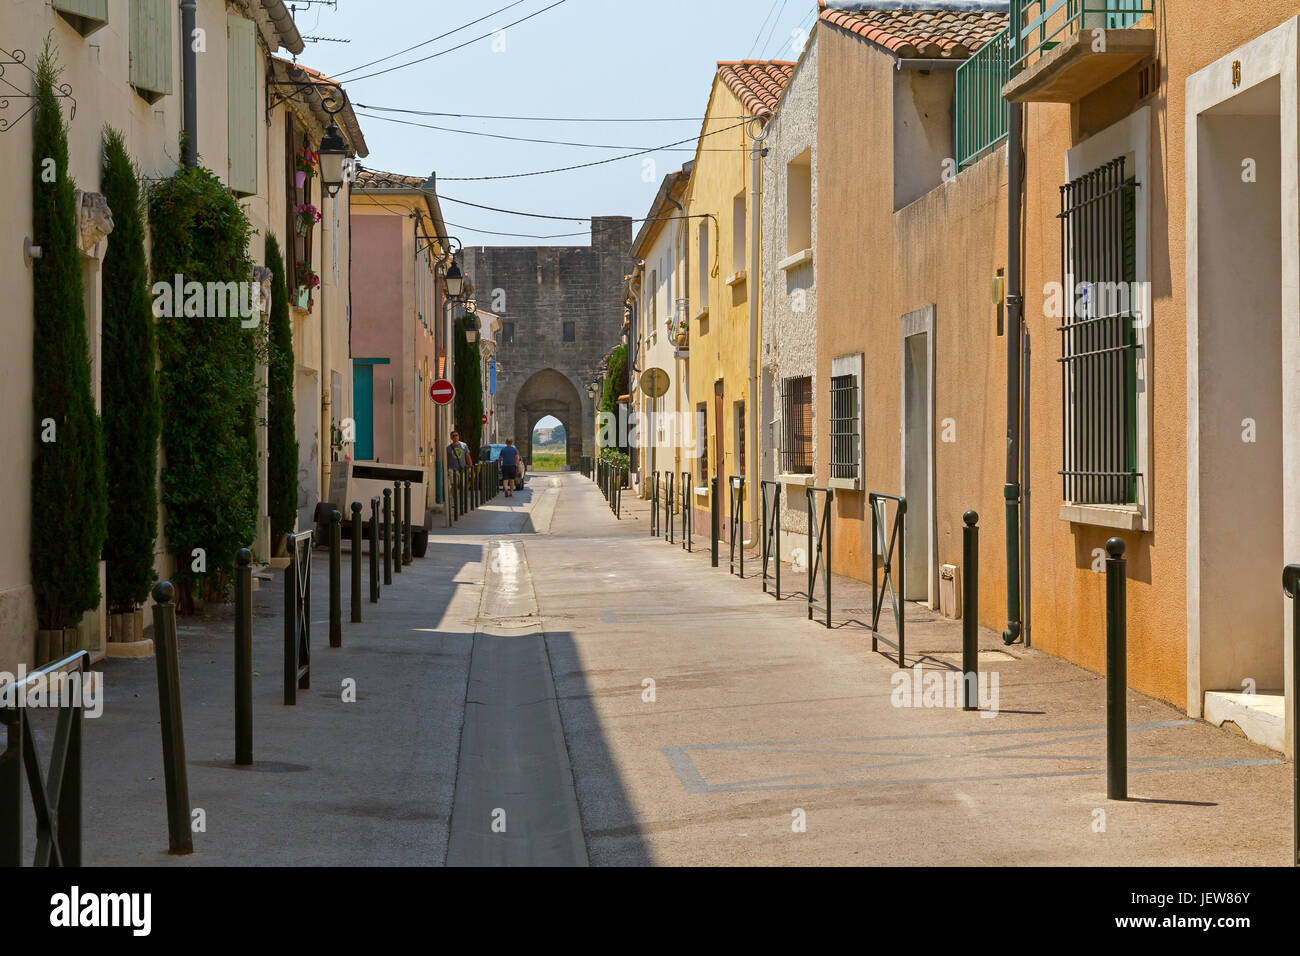 Picturesque old street in Aigues Mortes, France. Stock Photo